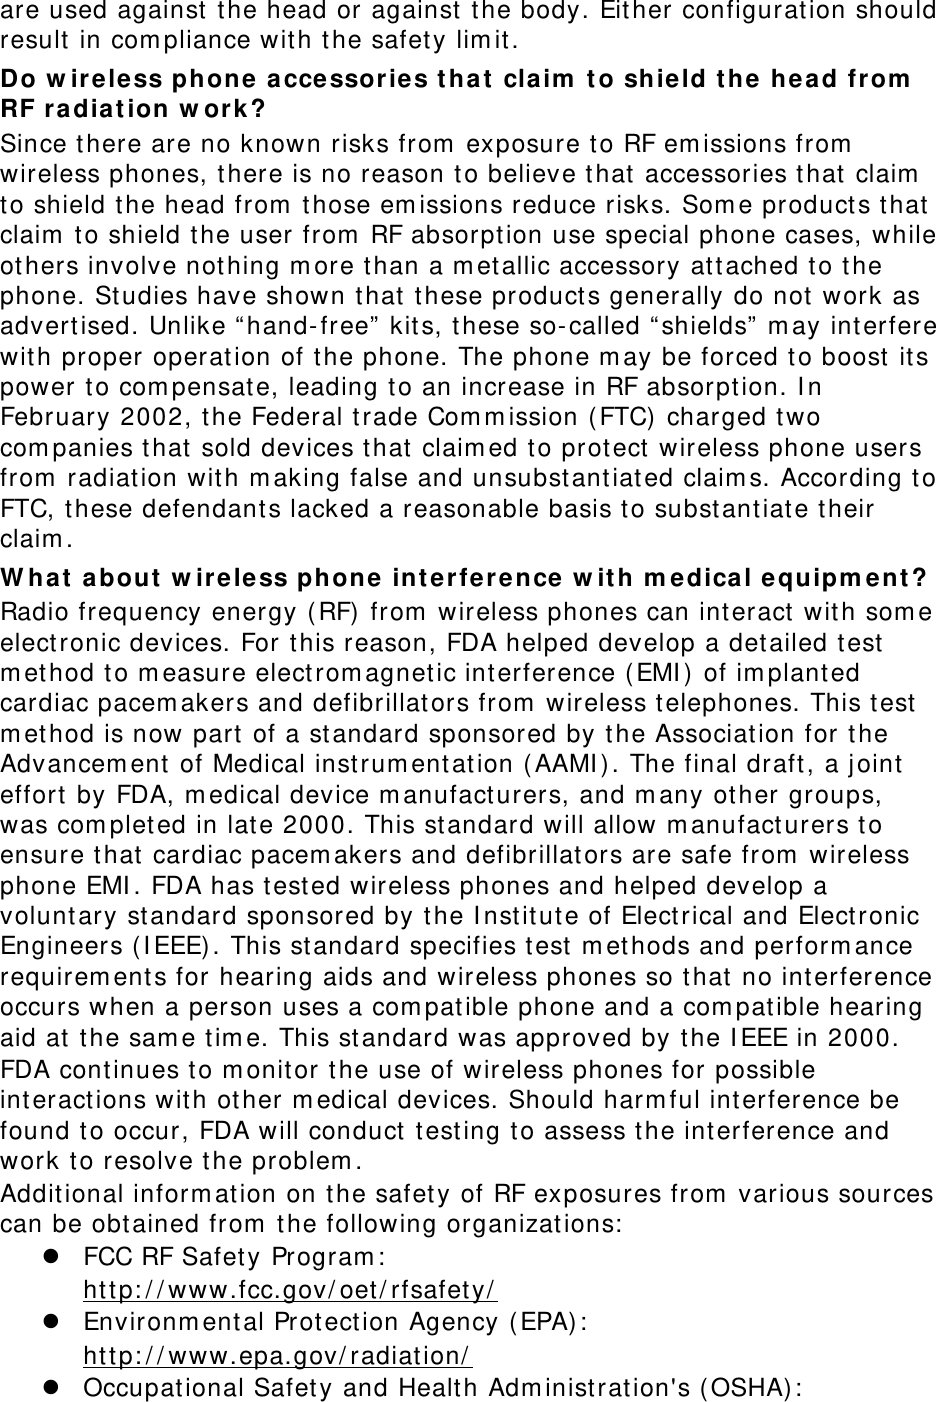 are used against  t he head or against  the body. Eit her configuration should result in com pliance with t he safet y lim it. Do w ir e less phone  accessories t hat  claim  t o sh ie ld t he he a d from  RF ra dia t ion w ork ? Since there are no known risks from  exposure to RF em issions from  wireless phones, there is no reason t o believe t hat accessories that  claim  to shield the head from  t hose em issions reduce risks. Som e product s t hat claim  t o shield t he user from  RF absorpt ion use special phone cases, while others involve not hing m ore than a m et allic accessory at tached t o t he phone. St udies have shown t hat t hese products generally do not work as advertised. Unlike “ hand- free”  kits, t hese so-called “ shields”  m ay int erfere with proper operation of t he phone. The phone m ay be forced t o boost  its power t o com pensat e, leading to an increase in RF absorption. I n February 2002, t he Federal t rade Com m ission ( FTC) charged t wo com panies t hat sold devices t hat claim ed t o protect  wireless phone users from  radiat ion with m aking false and unsubstantiat ed claim s. According t o FTC, these defendants lacked a reasonable basis t o substantiat e their claim . W hat  a bout  w ire less phone int e r fe r e nce  w it h m e dical e quipm ent ? Radio frequency energy ( RF) from  wireless phones can int eract  wit h som e elect ronic devices. For t his reason, FDA helped develop a det ailed test  m et hod t o m easure elect rom agnet ic int erference ( EMI )  of im planted cardiac pacem akers and defibrillators from  wireless t elephones. This t est  m et hod is now part  of a standard sponsored by t he Association for t he Advancem ent of Medical instrum ent ation ( AAMI ) . The final draft, a j oint effort  by FDA, m edical device m anufact urers, and m any other groups, was com plet ed in lat e 2000. This standard will allow m anufact urers t o ensure t hat cardiac pacem akers and defibrillators are safe from  wireless phone EMI . FDA has t est ed wireless phones and helped develop a voluntary st andard sponsored by t he I nstitut e of Electrical and Elect ronic Engineers ( I EEE) . This standard specifies t est m et hods and perform ance requirem ent s for hearing aids and wireless phones so t hat no int erference occurs when a person uses a com pat ible phone and a com pat ible hearing aid at  t he sam e t im e. This st andard was approved by t he I EEE in 2000. FDA continues to m onit or t he use of wireless phones for possible interactions wit h ot her m edical devices. Should harm ful int erference be found t o occur, FDA will conduct t esting t o assess t he interference and work to resolve the problem . Additional inform ation on t he safet y of RF exposures from  various sources can be obtained from  t he following organizat ions:  z FCC RF Safet y Program :   htt p: / / www.fcc.gov/ oet / rfsafet y/  z Environm ental Protect ion Agency ( EPA) :   htt p: / / www.epa.gov/ radiation/  z Occupational Safety and Health Adm inist rat ion&apos;s ( OSHA) :    